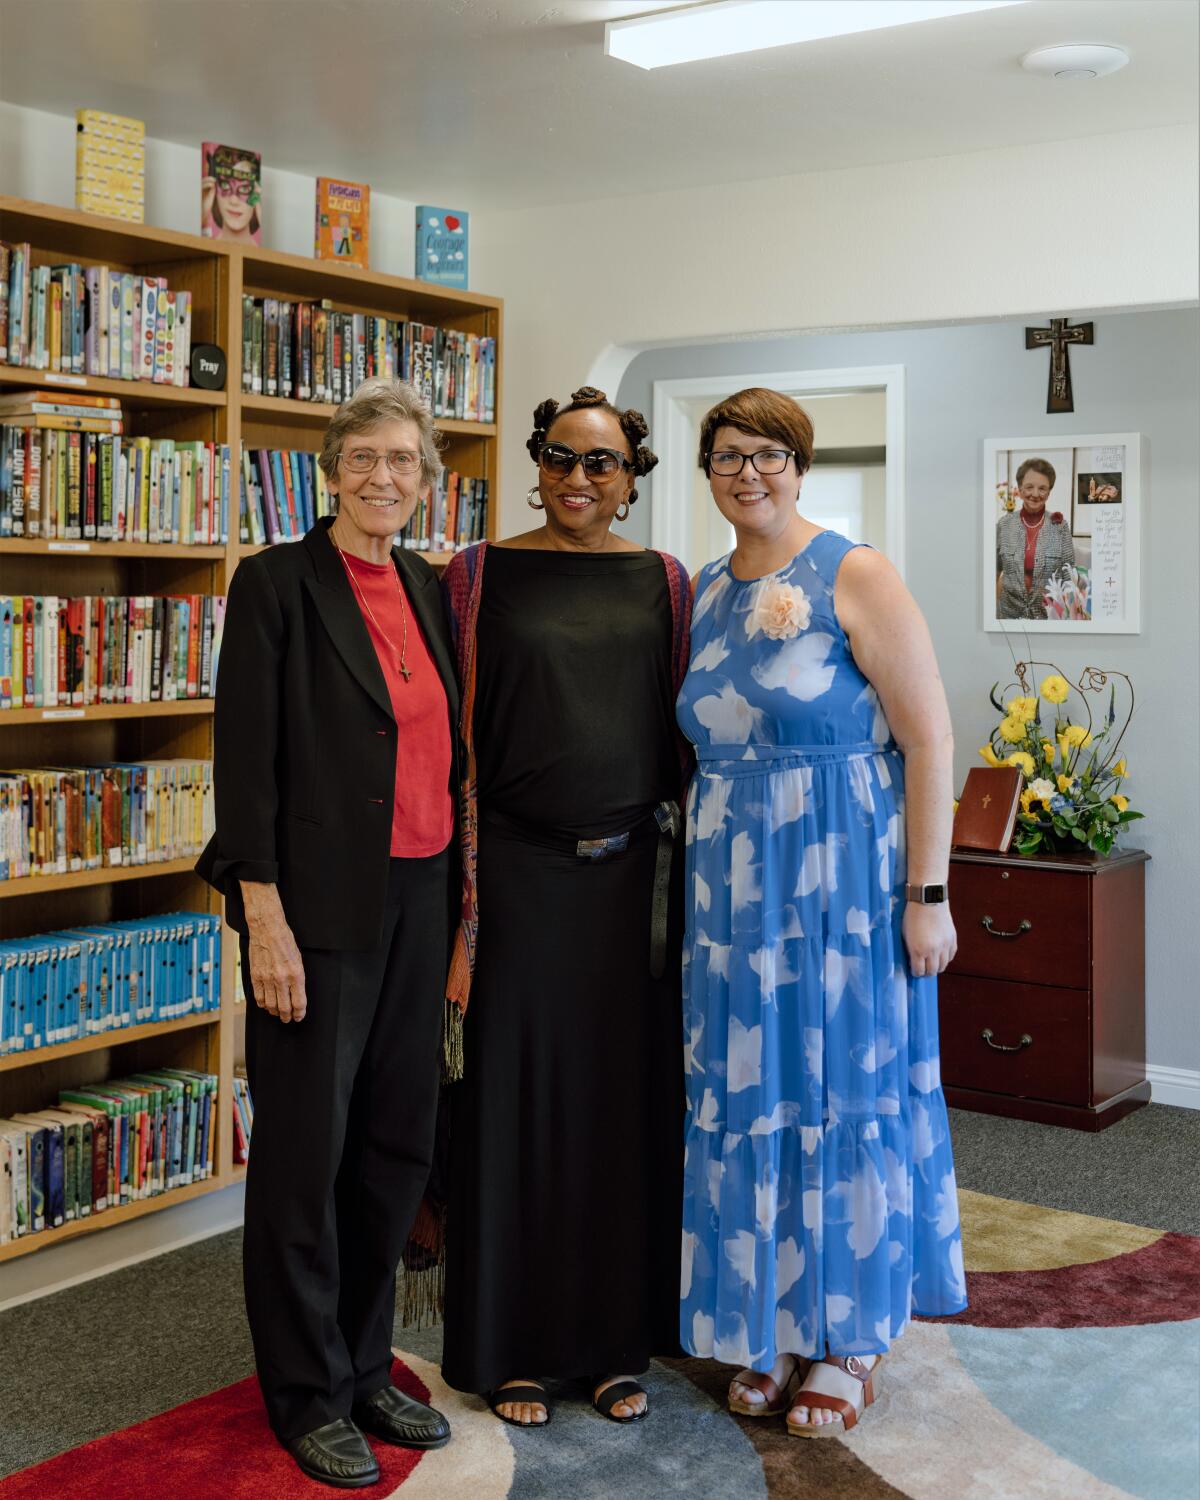 Sister Paulette Deters, left, with librarian Victoria Burnett and current Principal Kelly Botto at the school's new library.